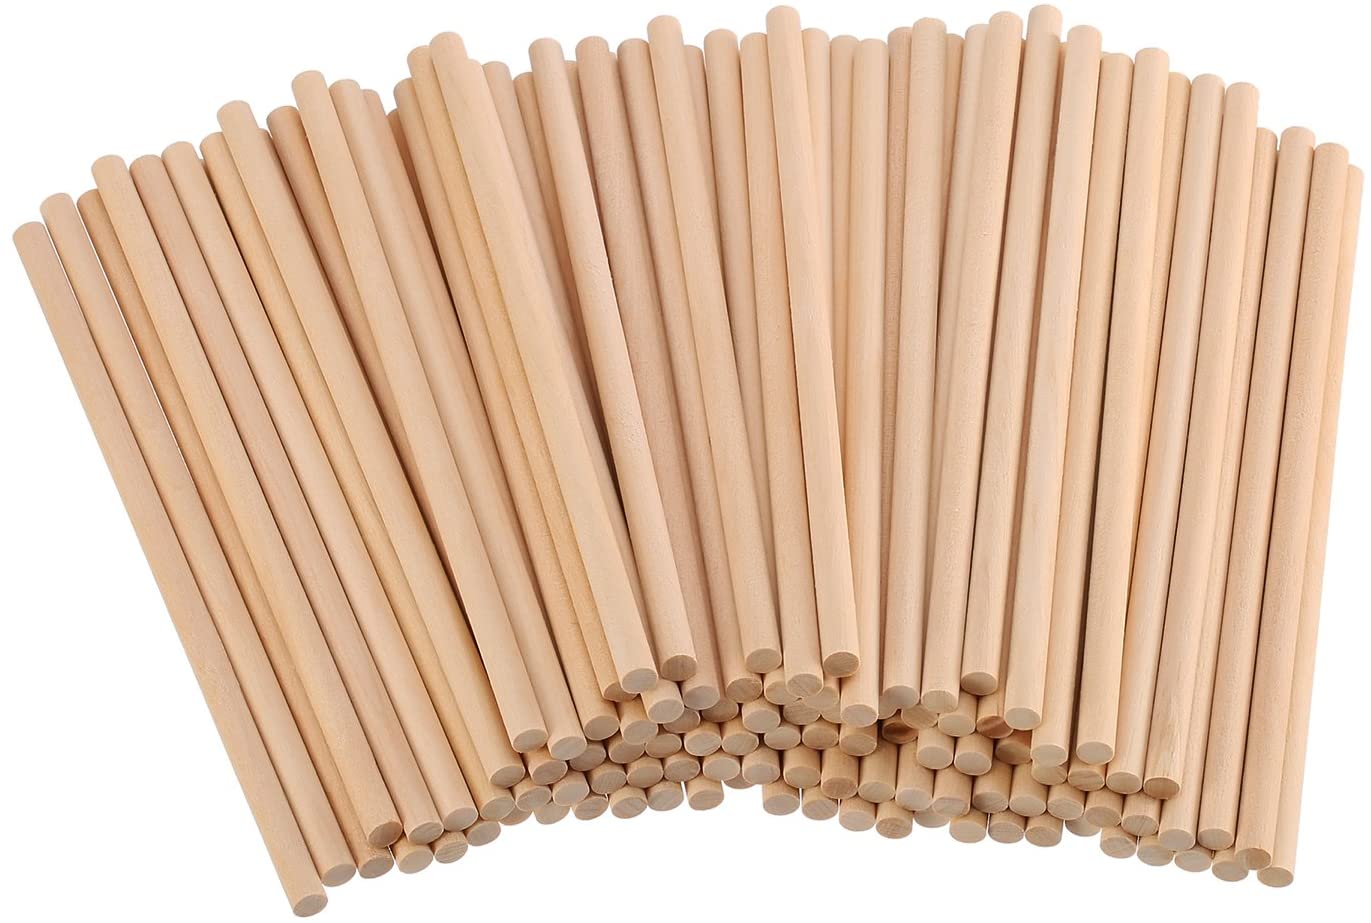 High quality wooden round shape dowel rods and stick (2).jpg